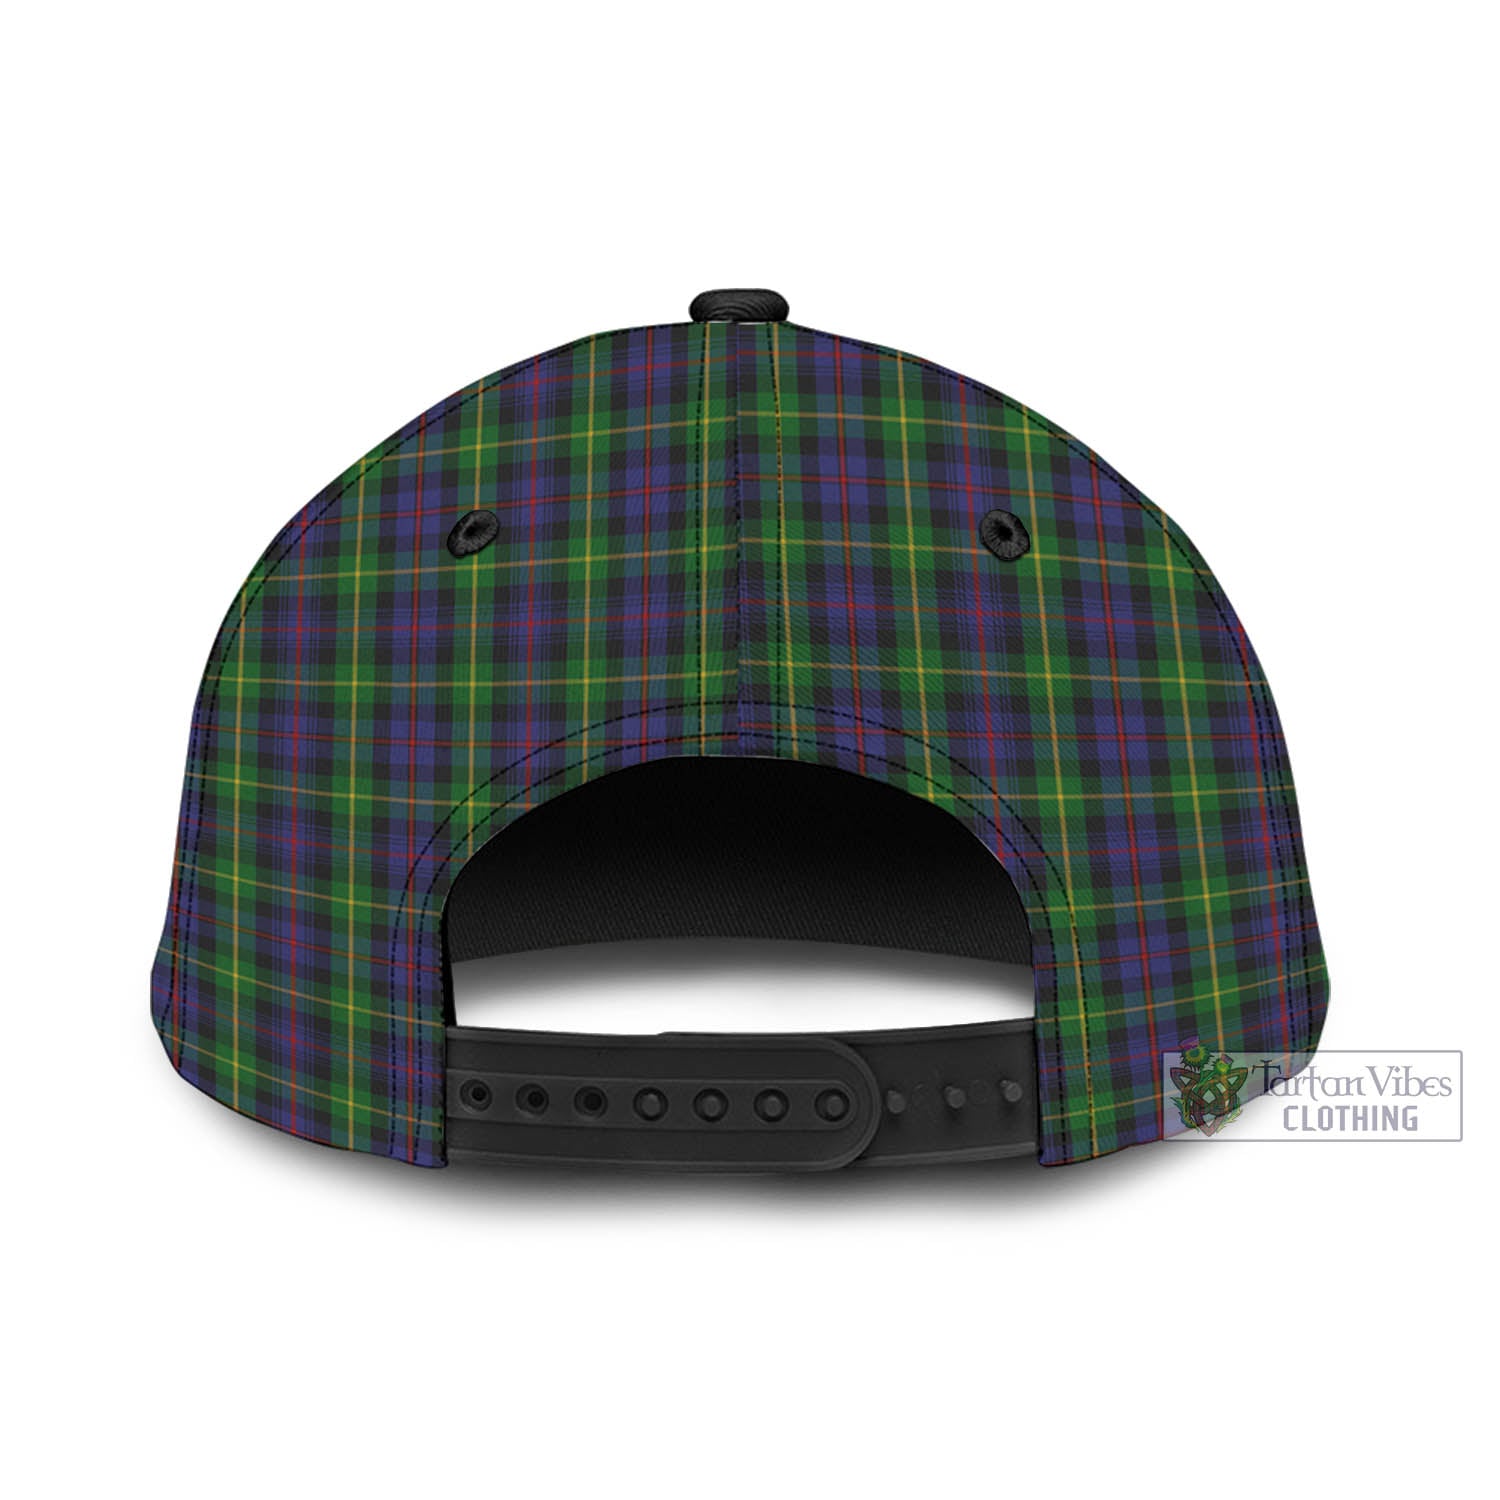 Tartan Vibes Clothing Farquharson Tartan Classic Cap with Family Crest In Me Style